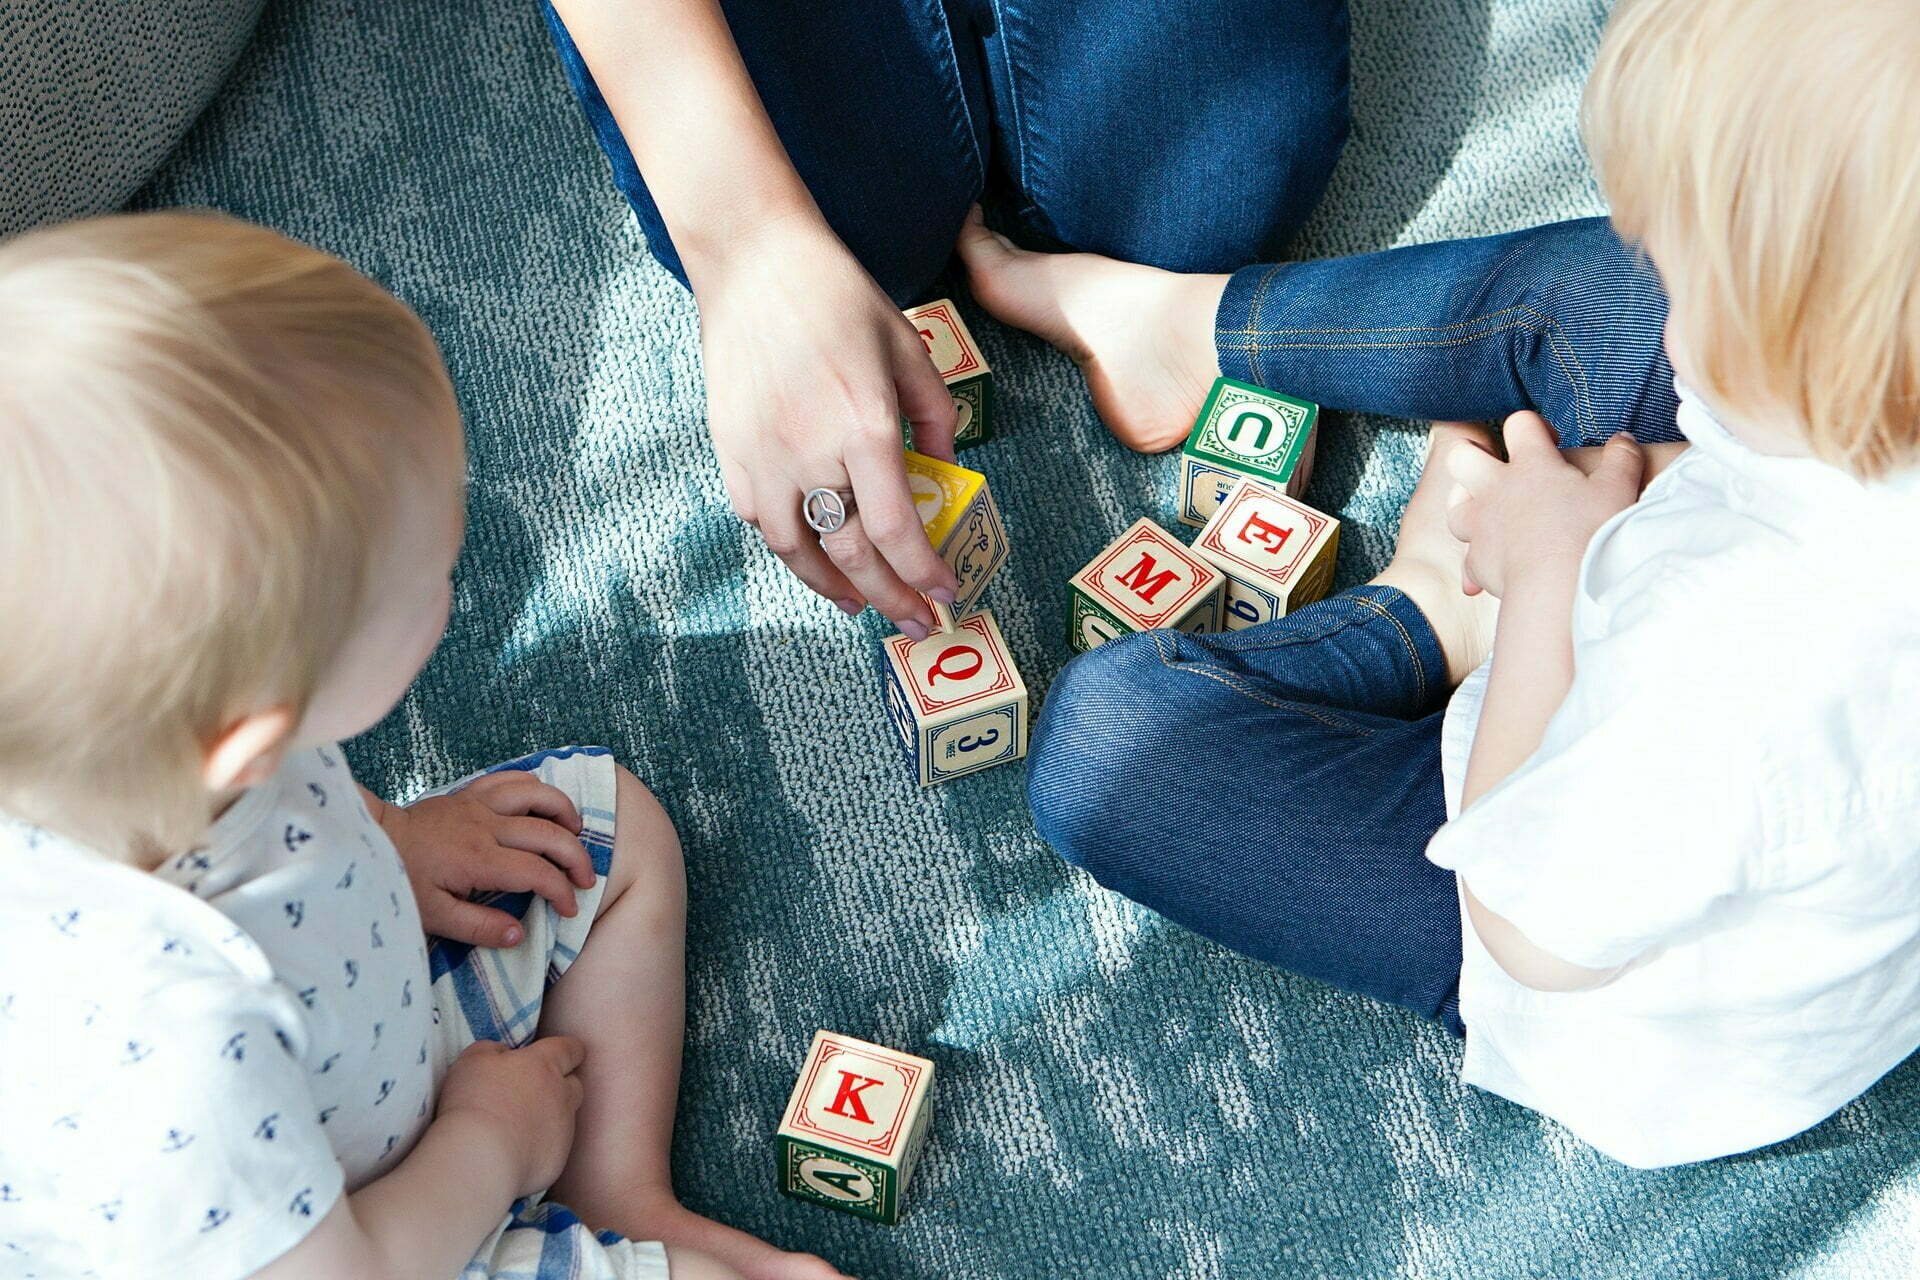 a group of people sitting on the floor playing with toys